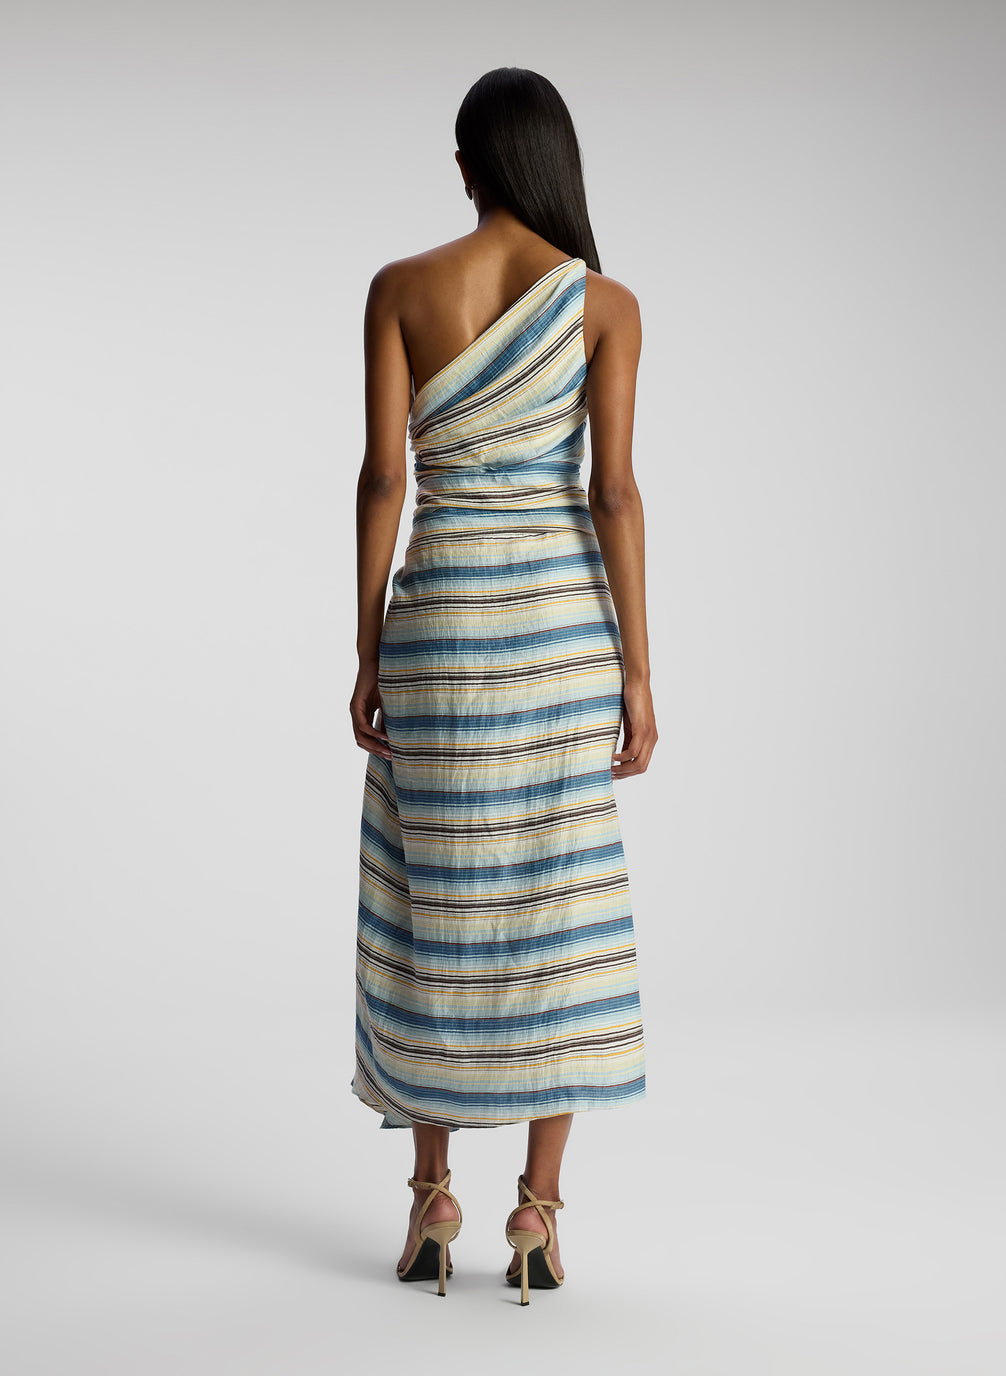 back view of woman wearing one shoulder striped midi dress